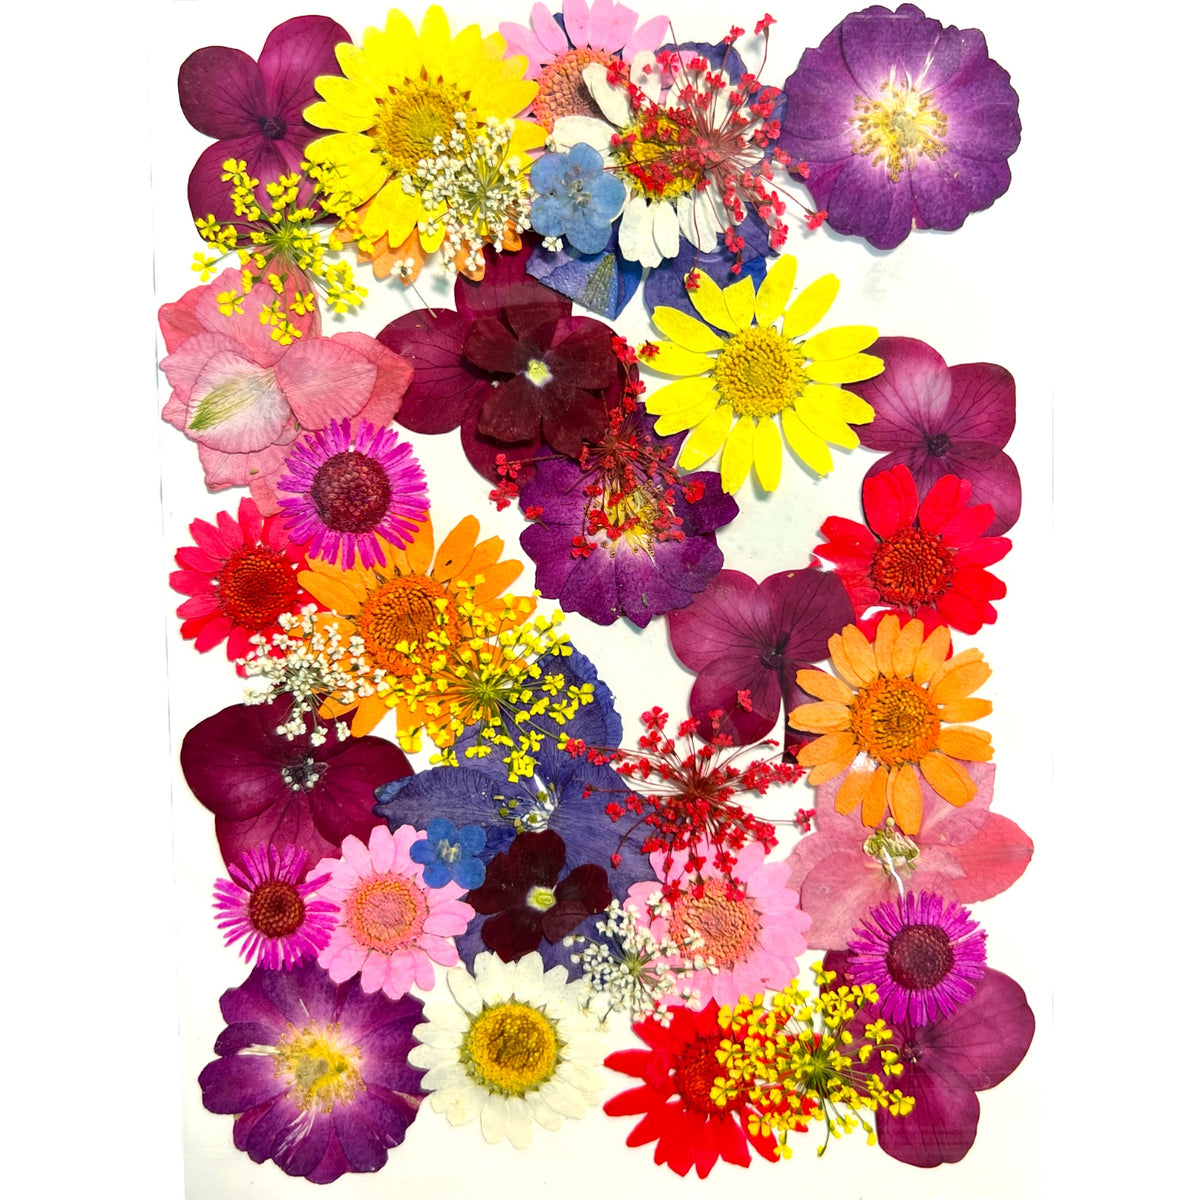 Sunshine Yellow Pressed Dry Flowers for Resin art By Get Inspired